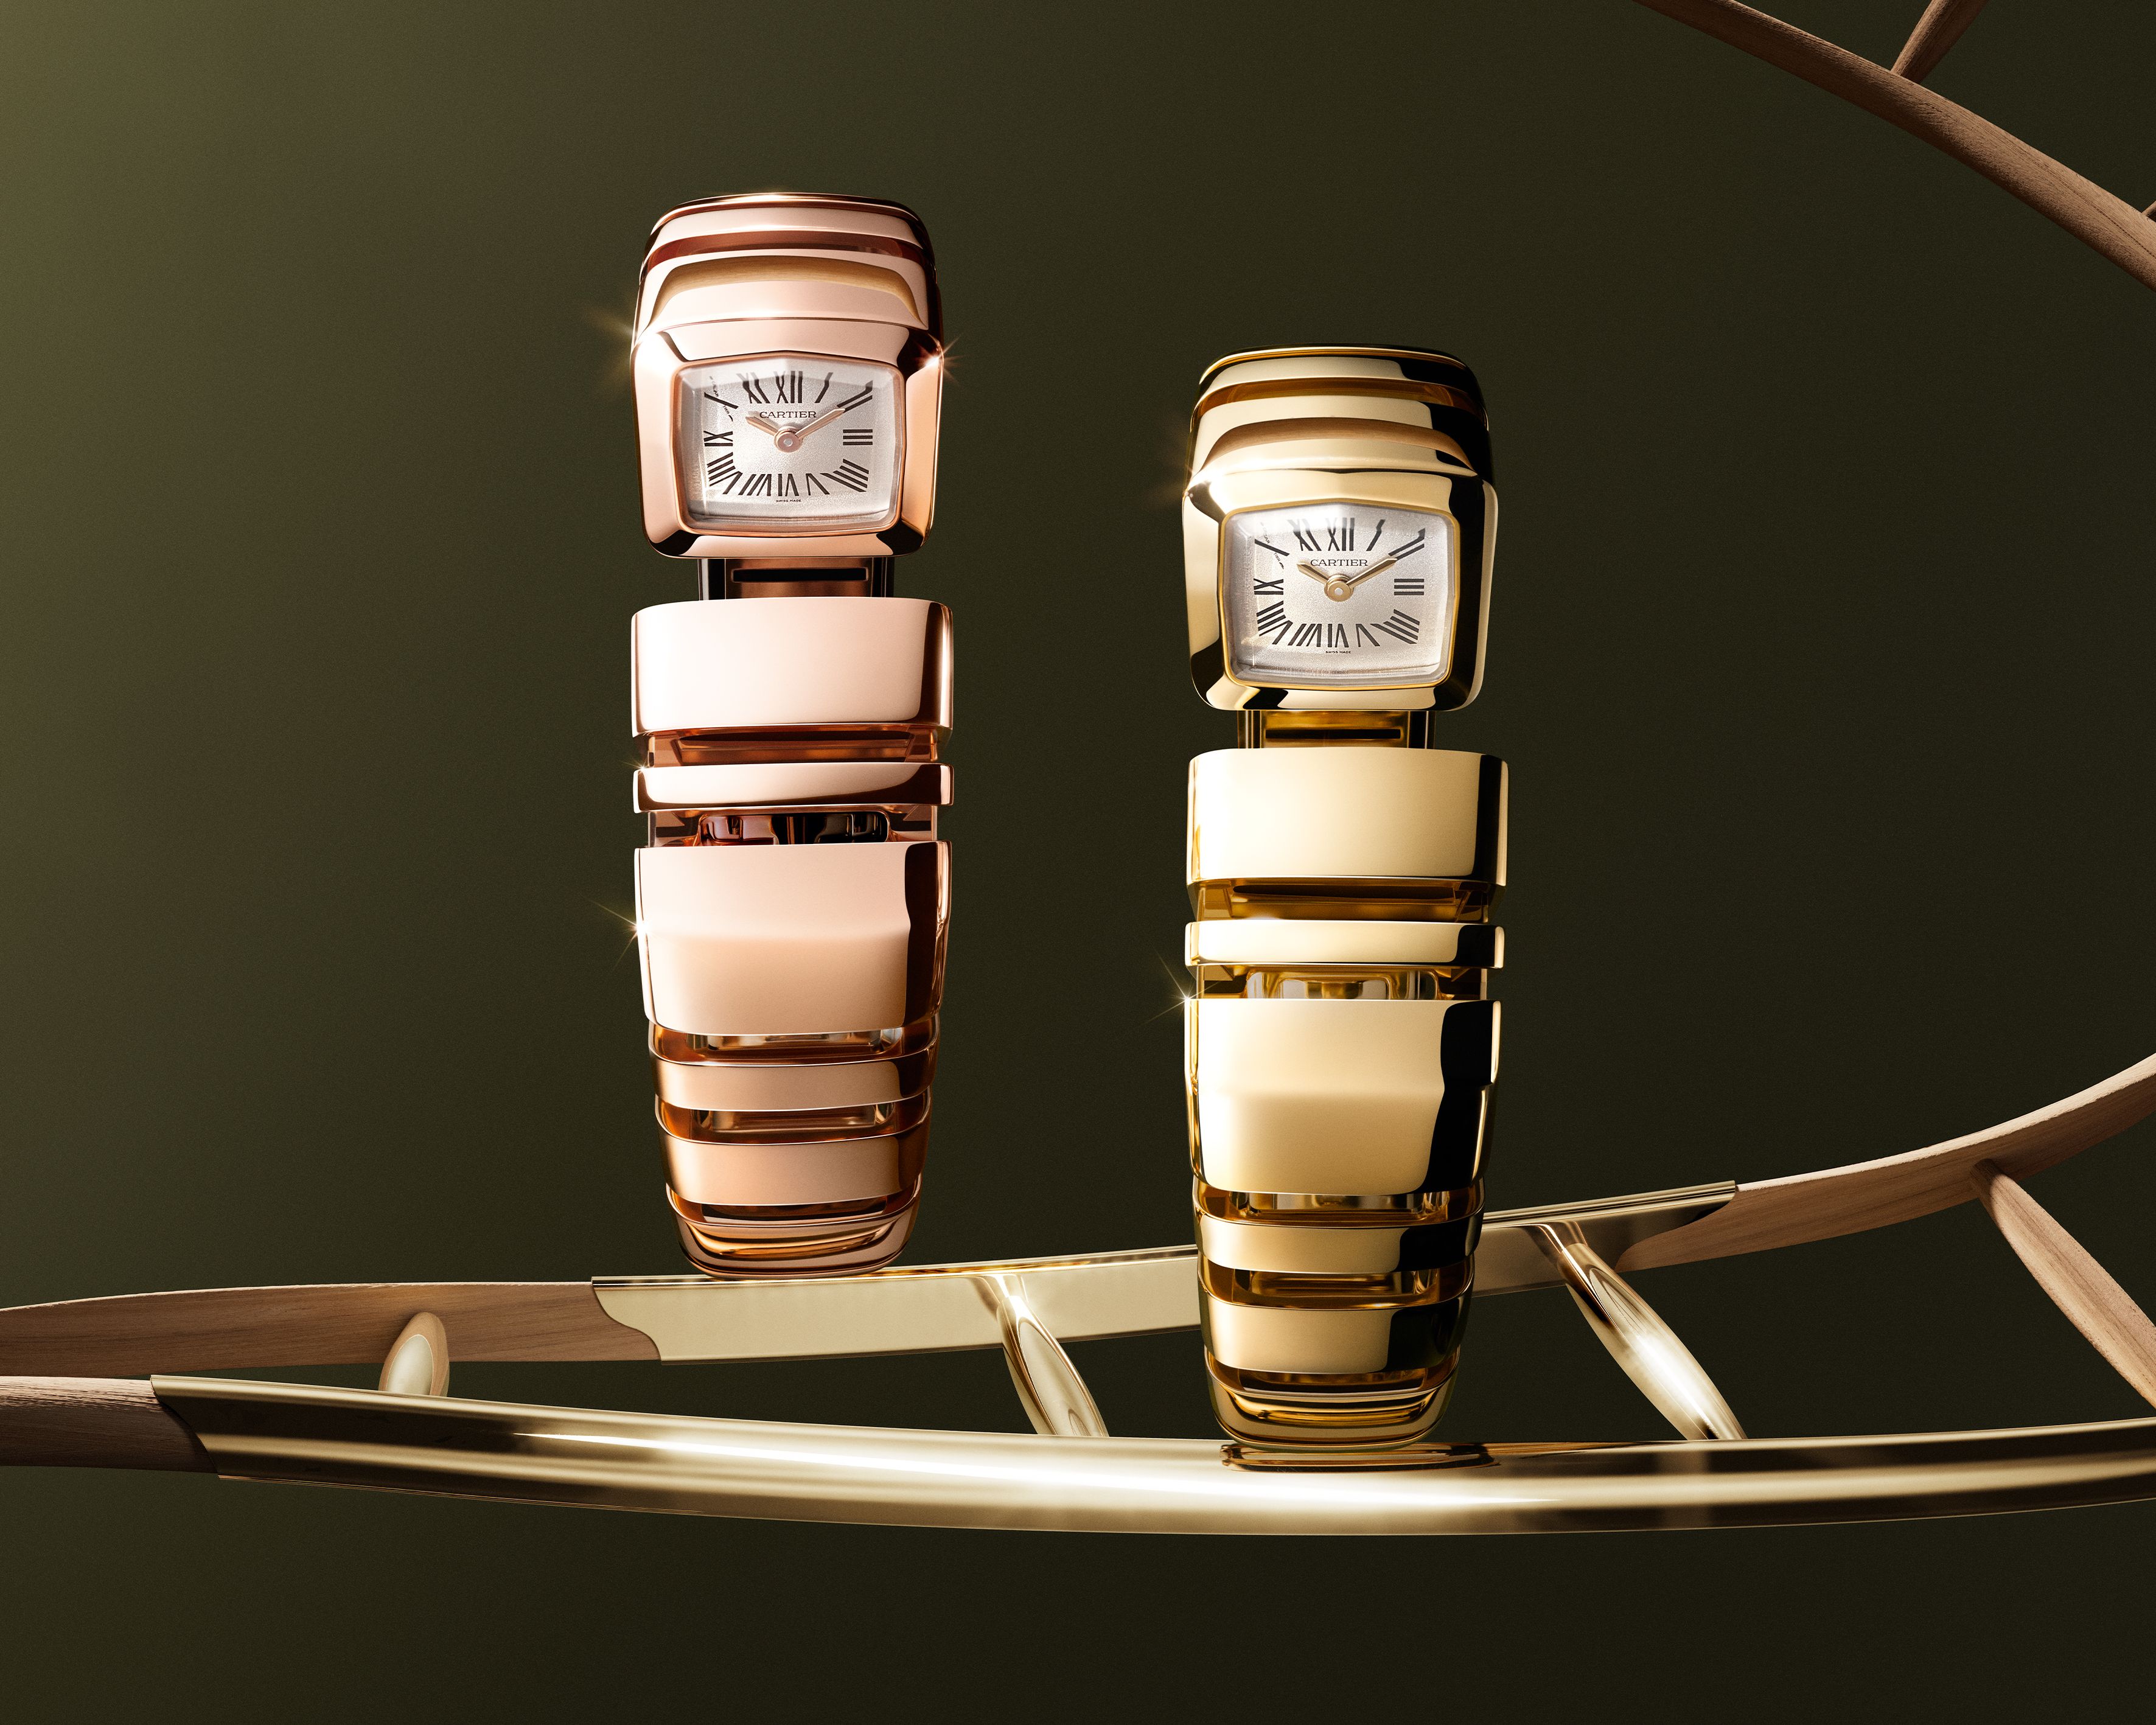 Reflection de Cartier comes in yellow and rose gold